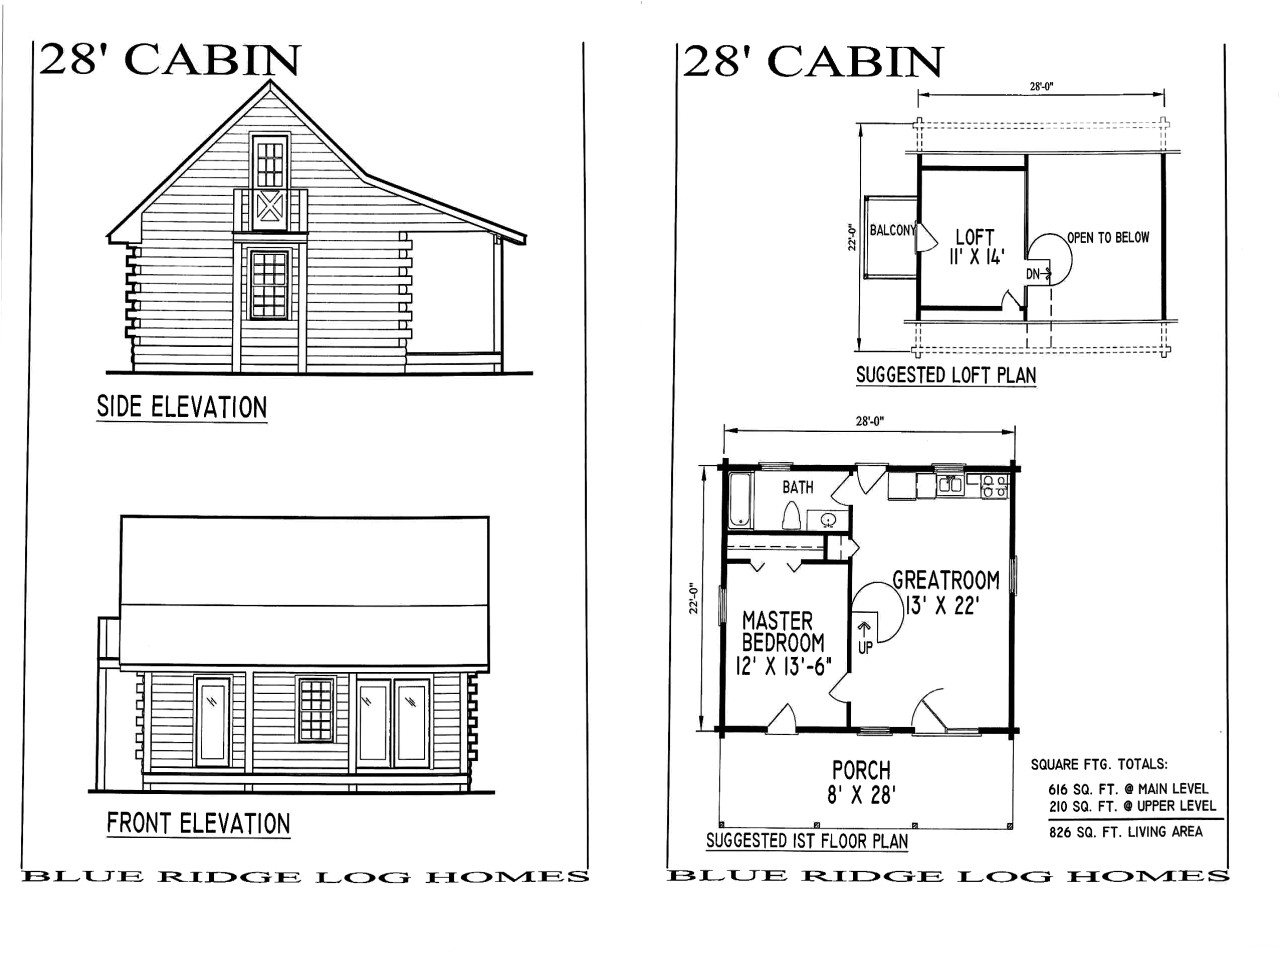 Log Cabin Home Designs and Floor Plans Small Log Cabin Floor Plans 17 Best 1000 Ideas About Log